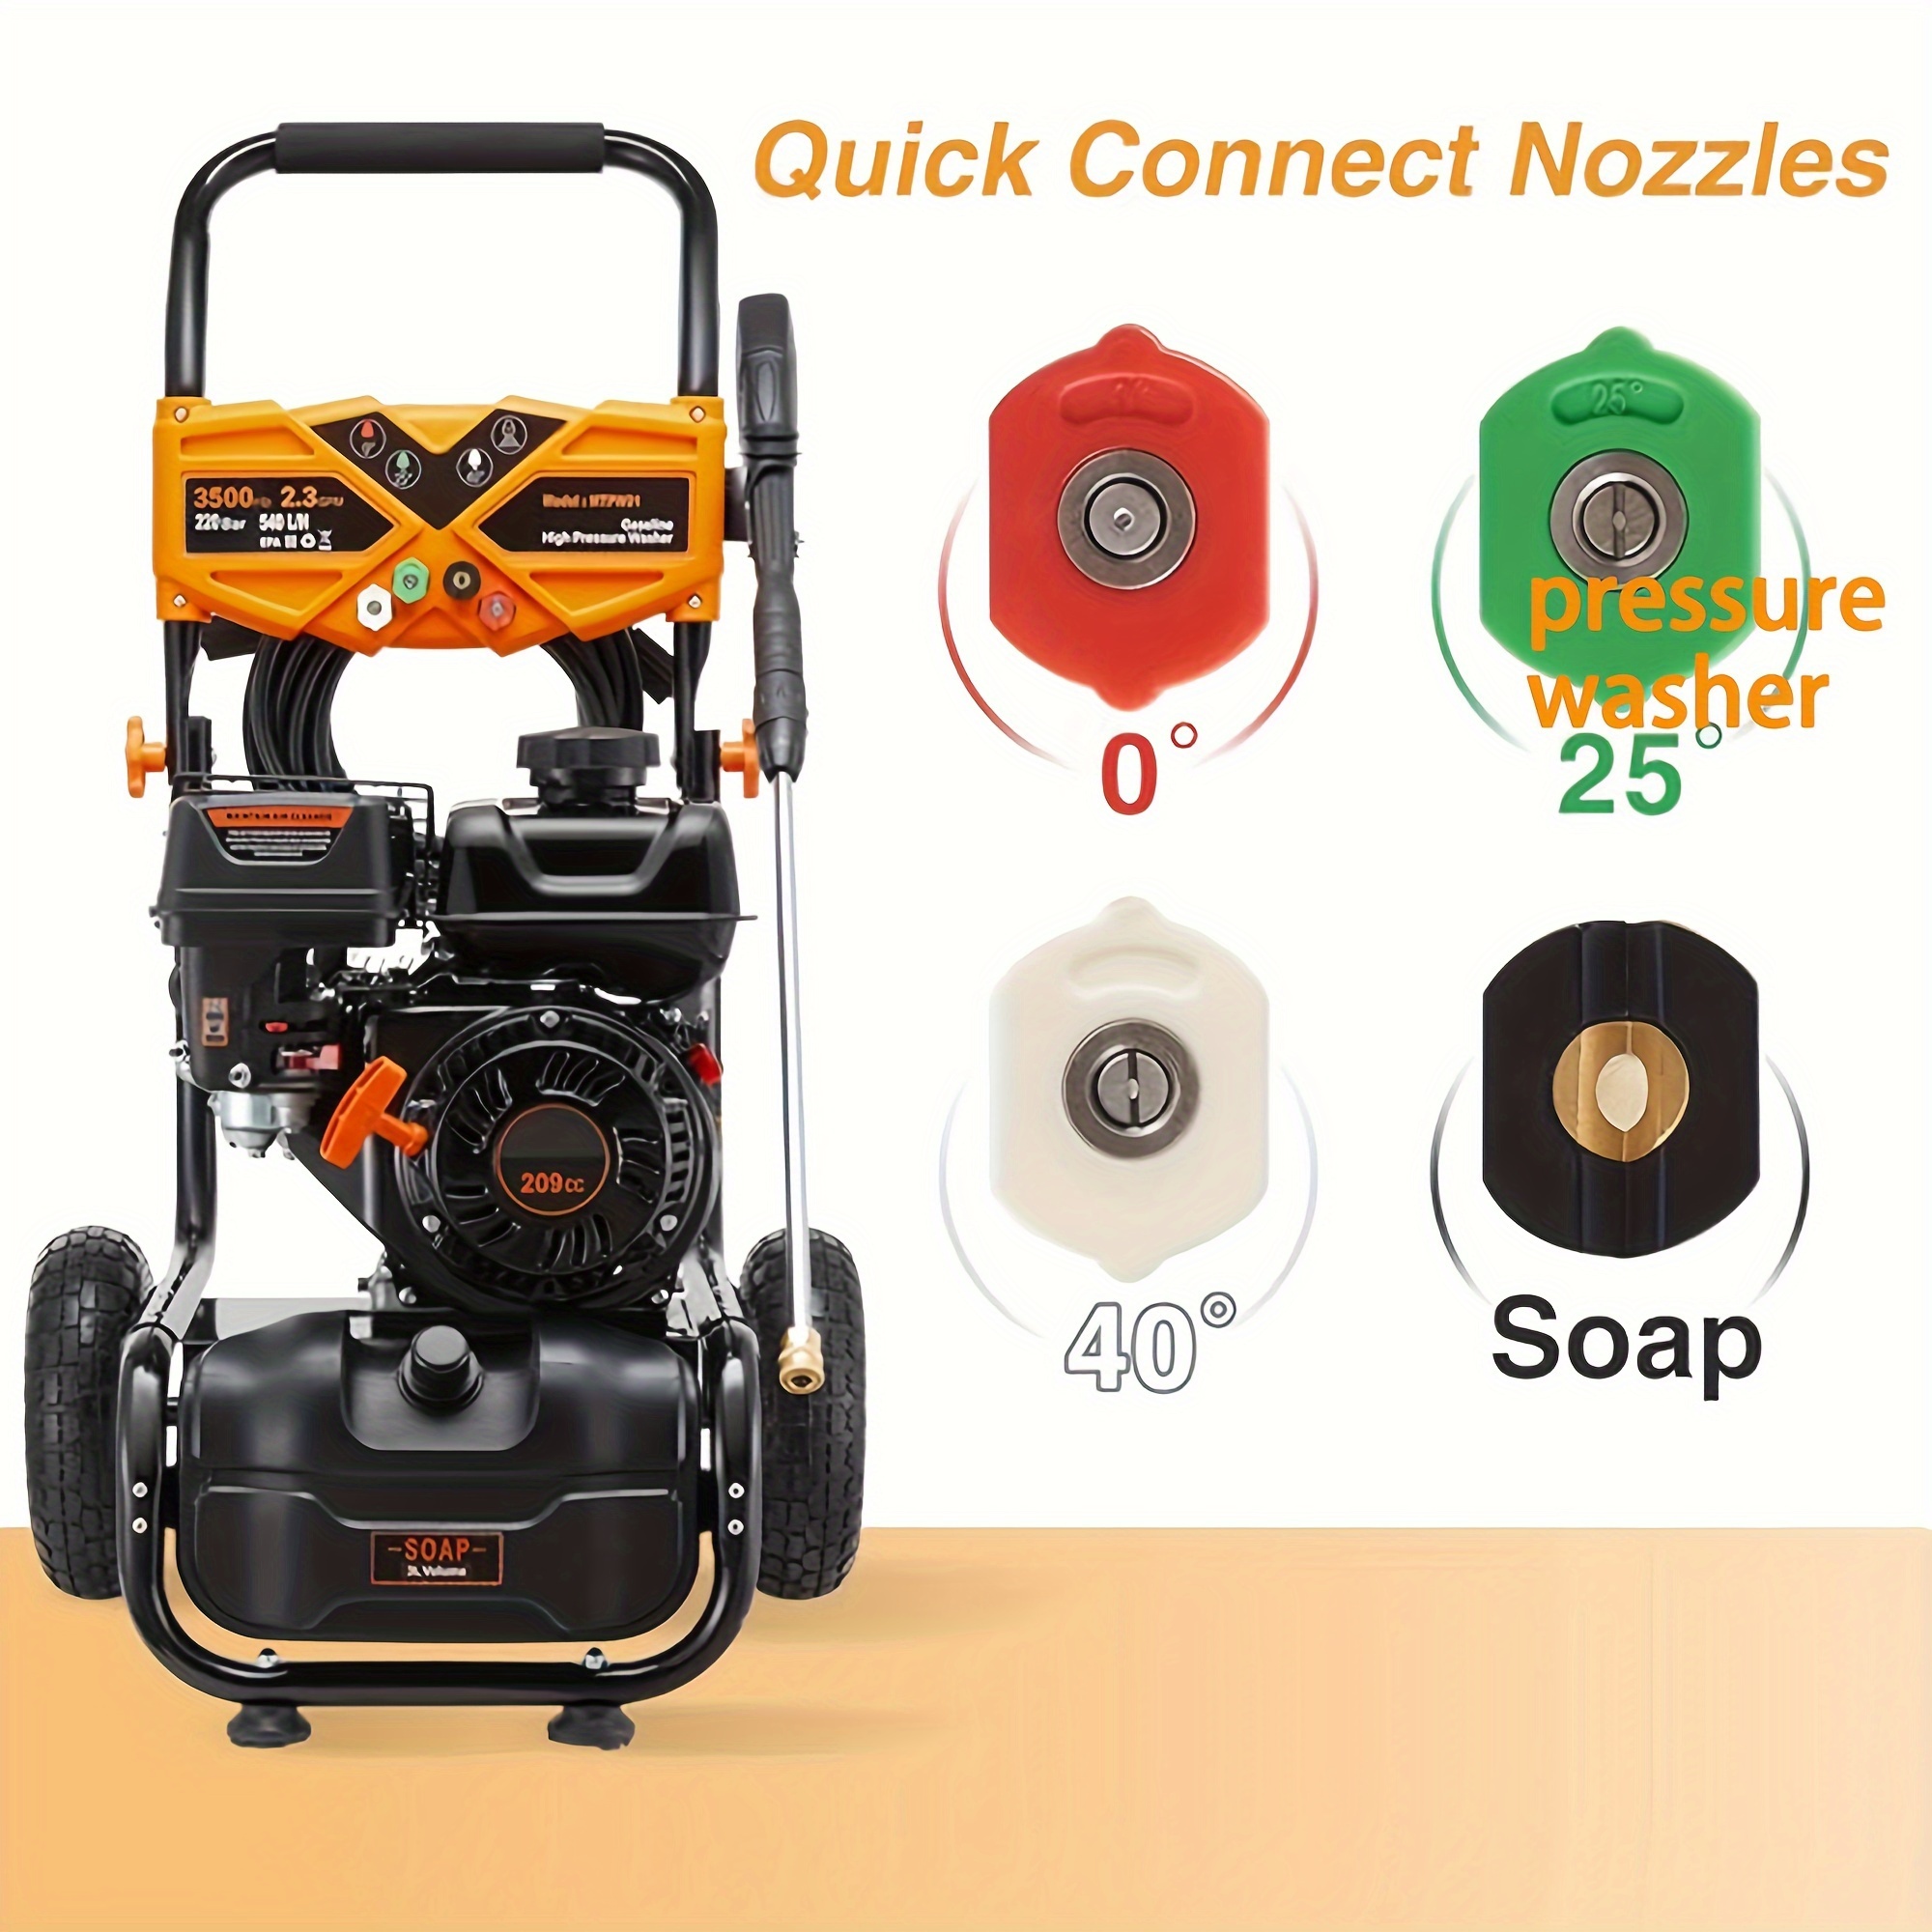 

Gas Pressure Washer, 3500 Max Psi And 2.3 Max Gpm, Brushless Motor, Onboard Soap Tank, Spray Gun And Wand, 5 Nozzle Set, For Cars/fences/driveways/homes/patios/furniture